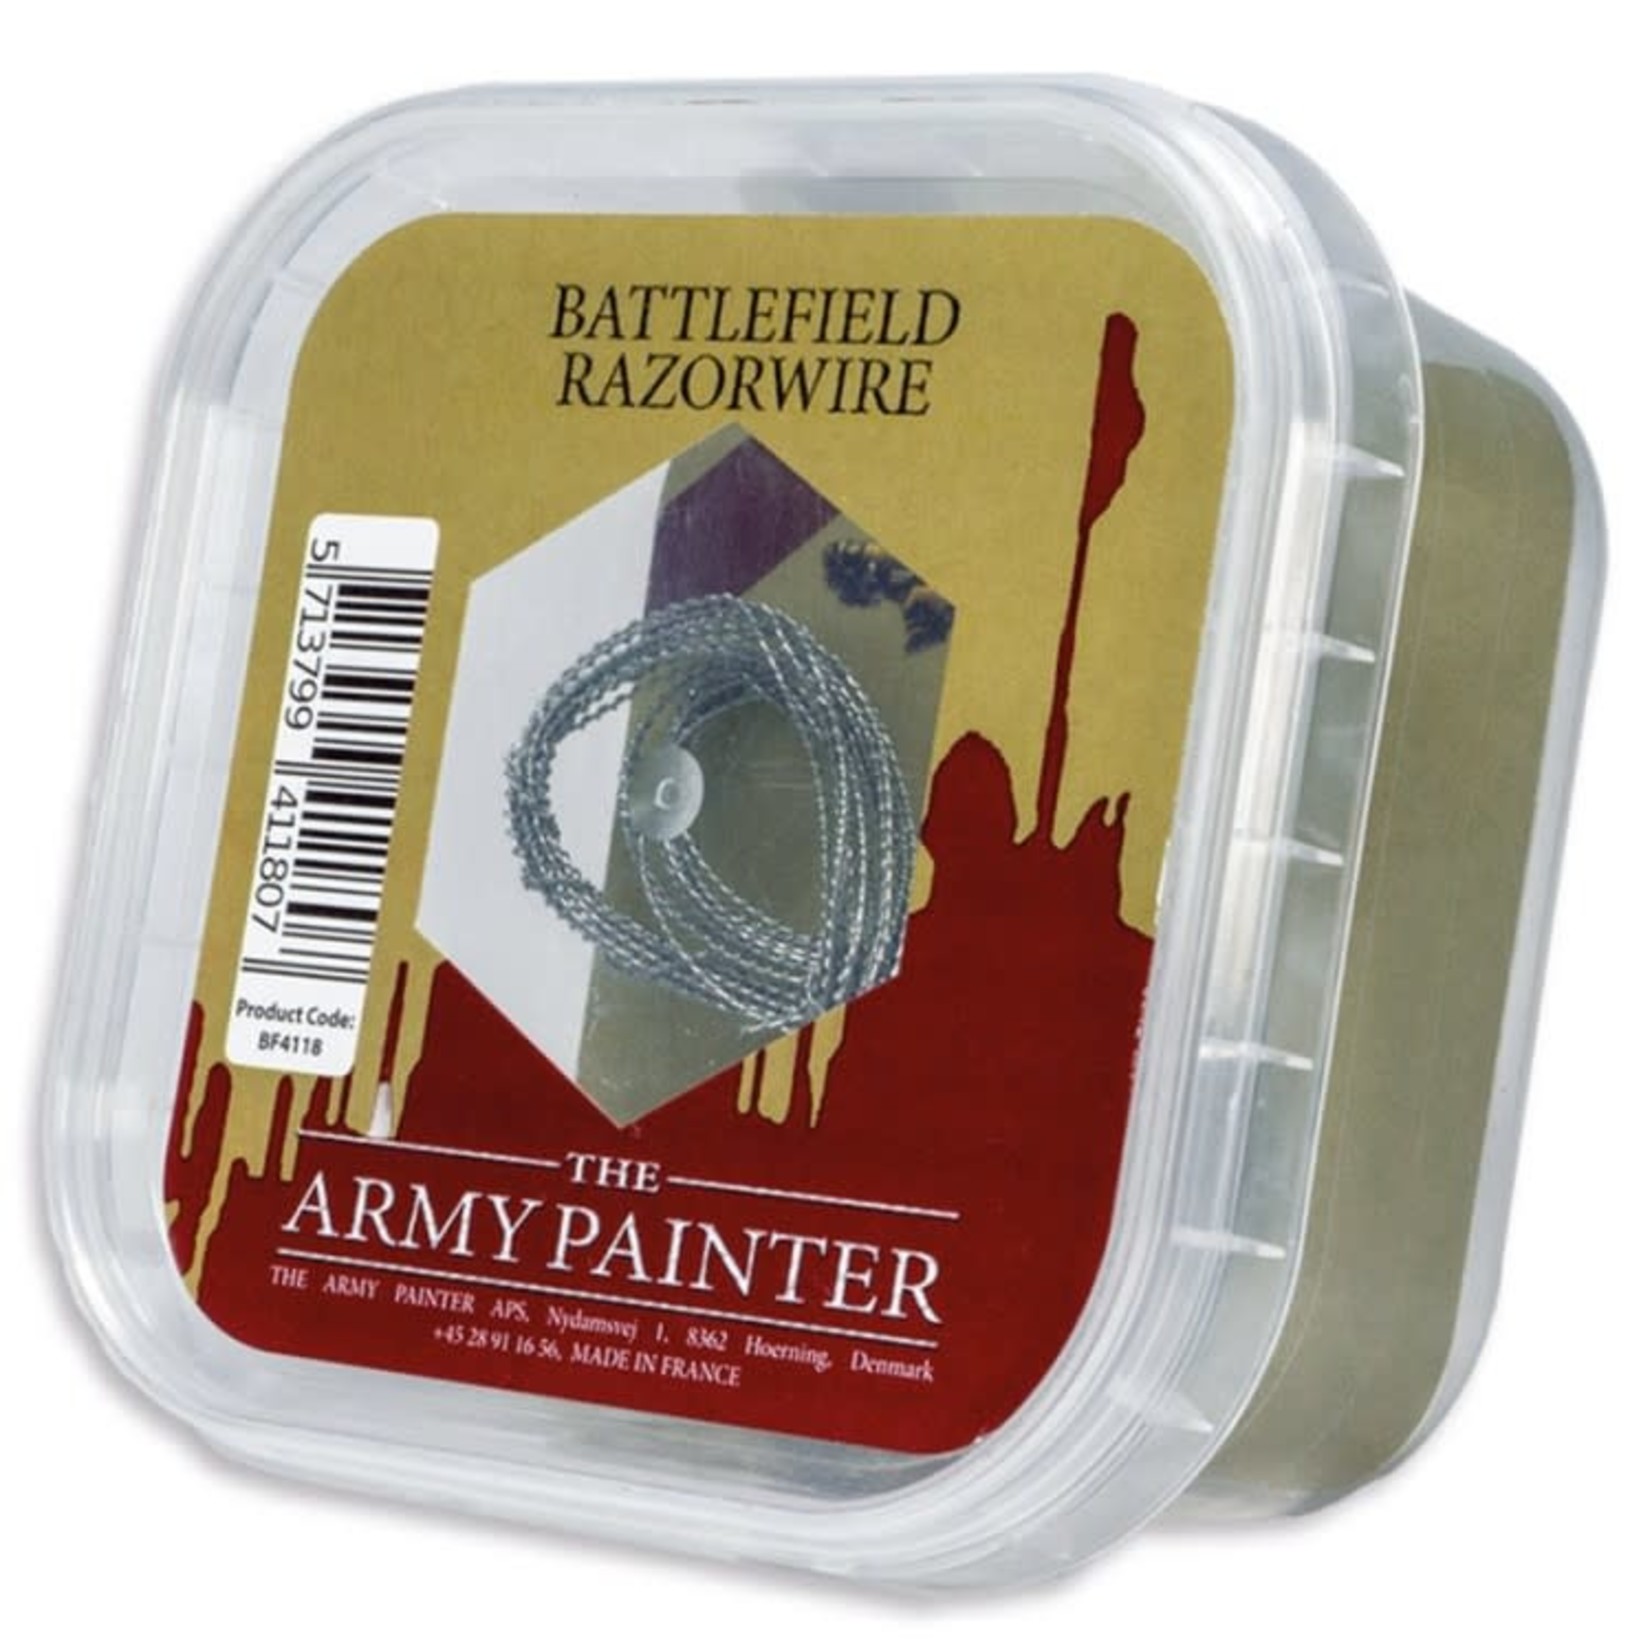 The Army Painter The Army Painter Battlefield Razorwire